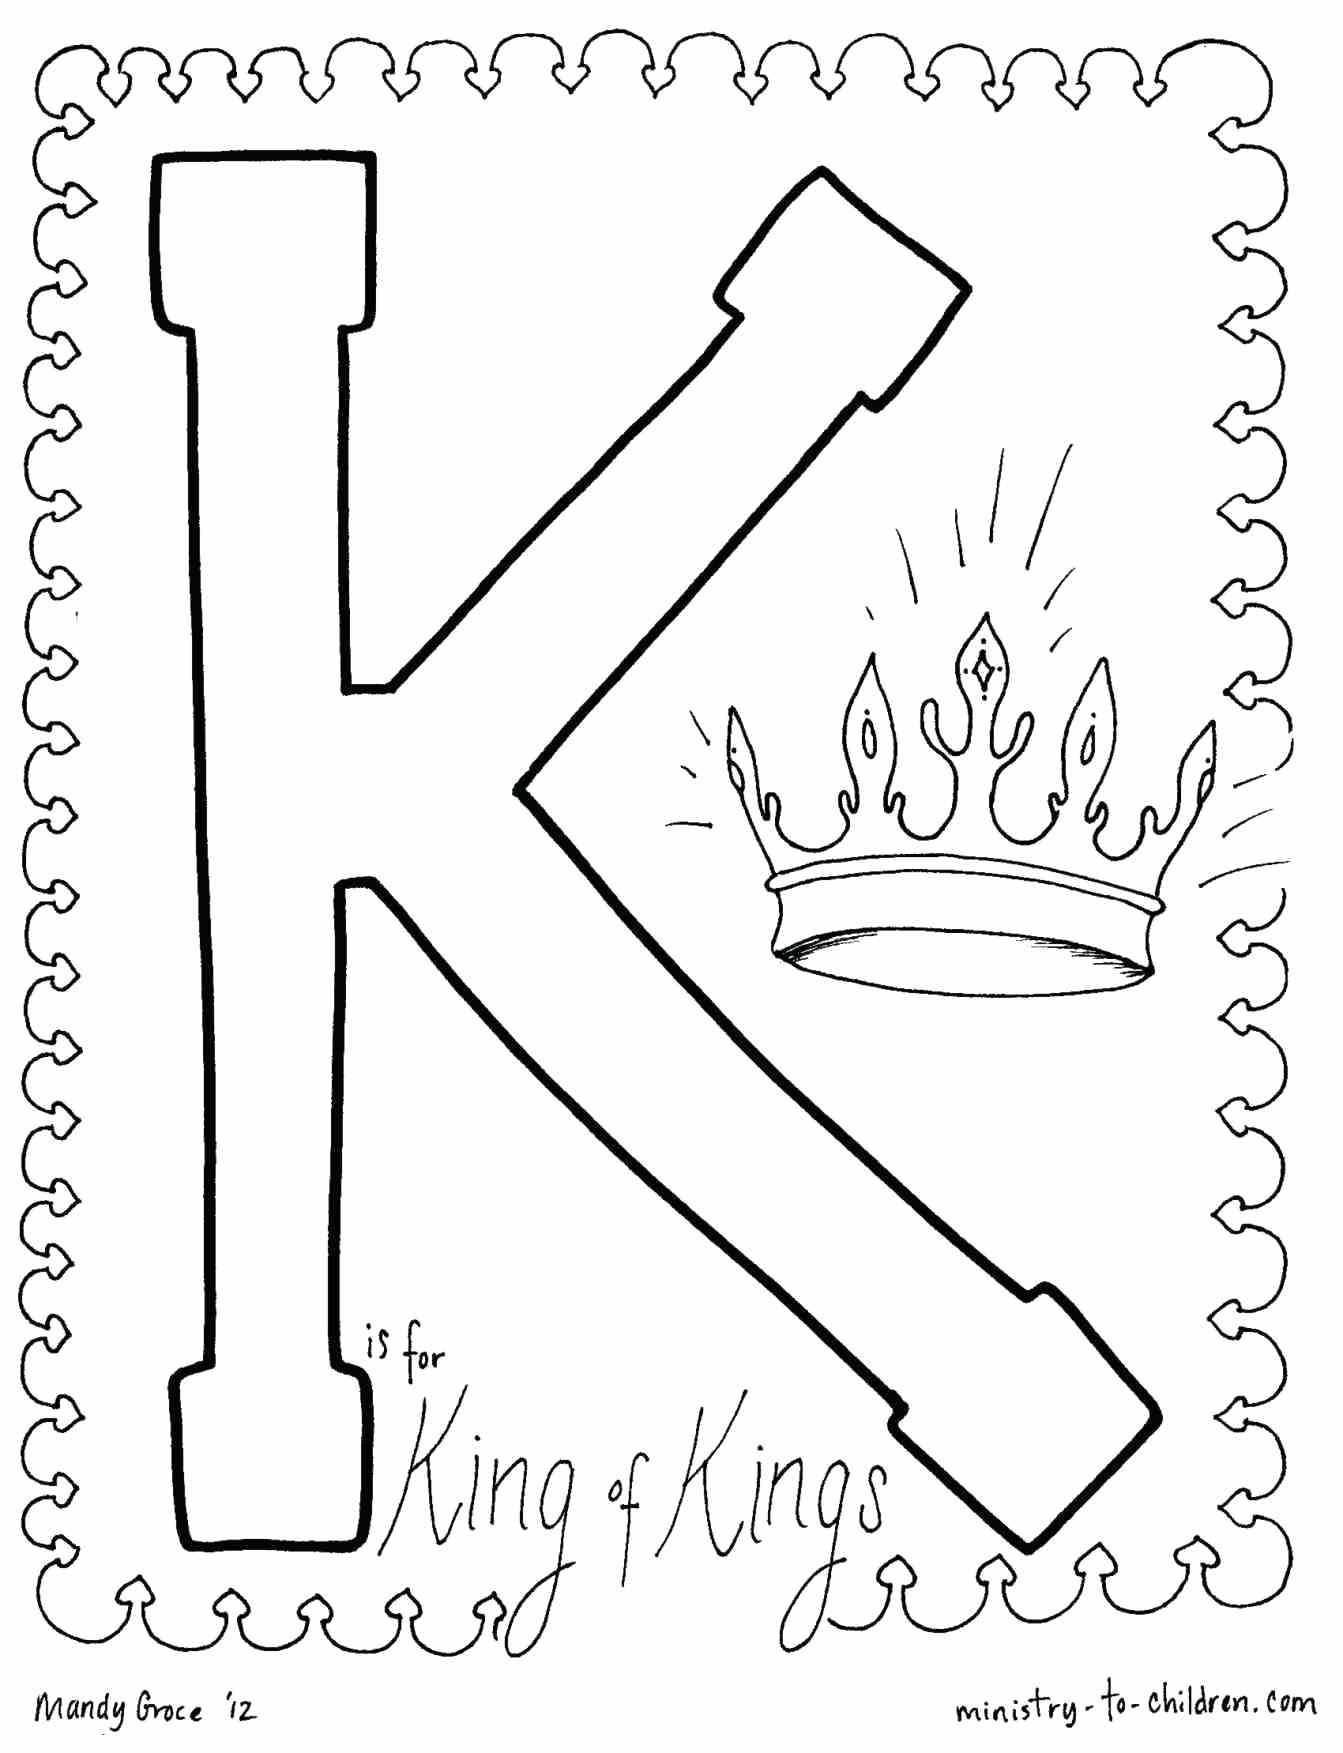 Holy Thursday Coloring Pages at GetColorings.com | Free printable